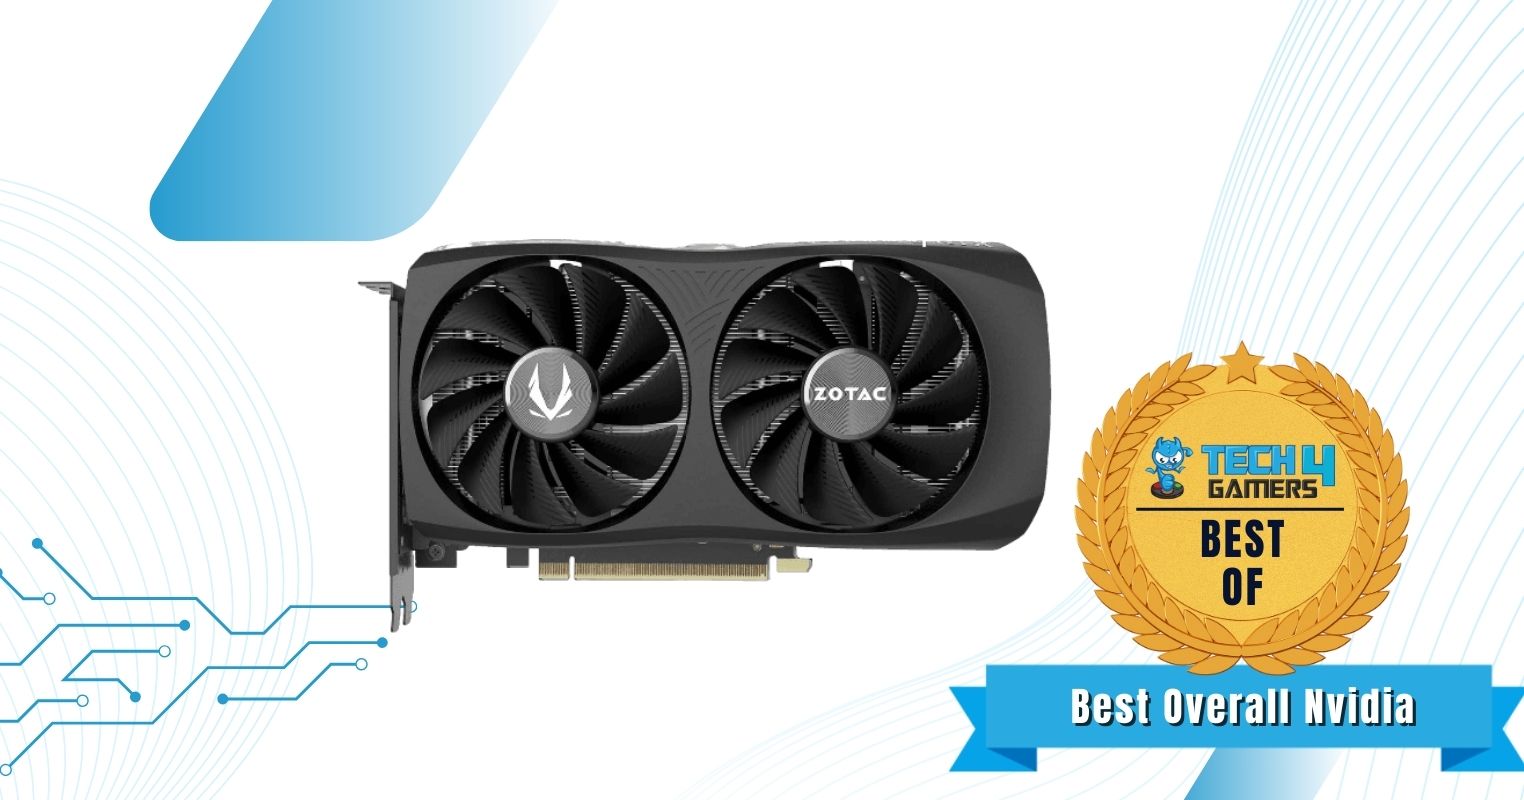 Zotac Gaming RTX 3060 8GB Twin Edge OC - Best Overall NVIDIA Graphics Card for 1080p